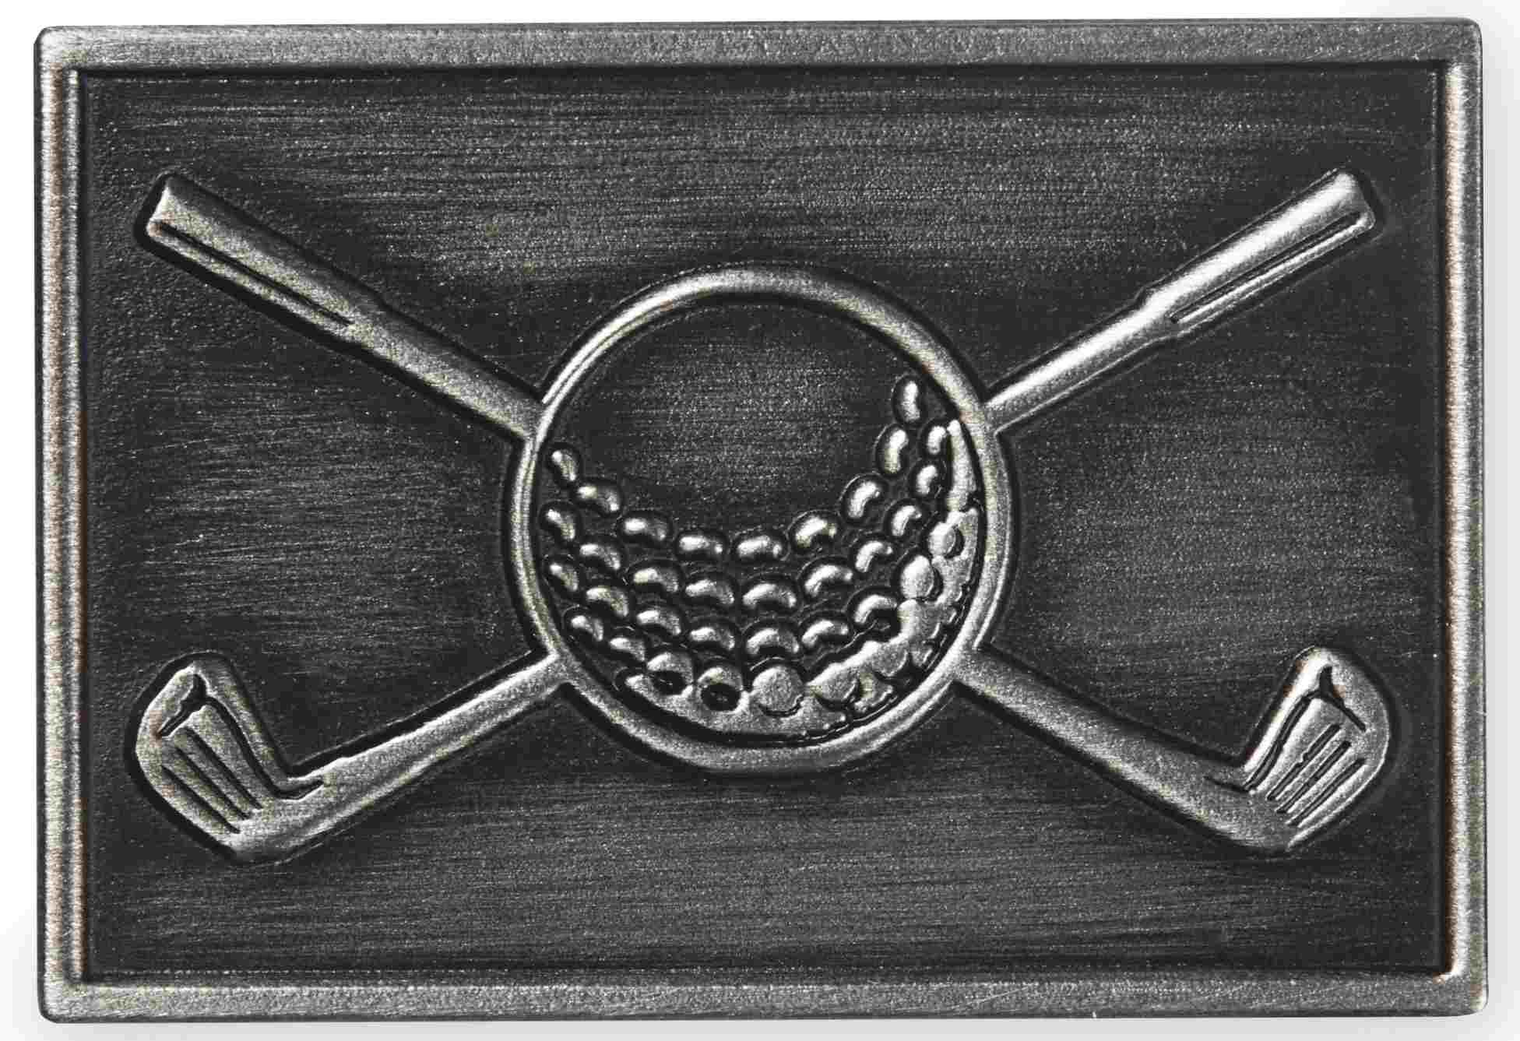 Featuring View of the Golf Metal Etched Emblem from Carkella by Wallaroo